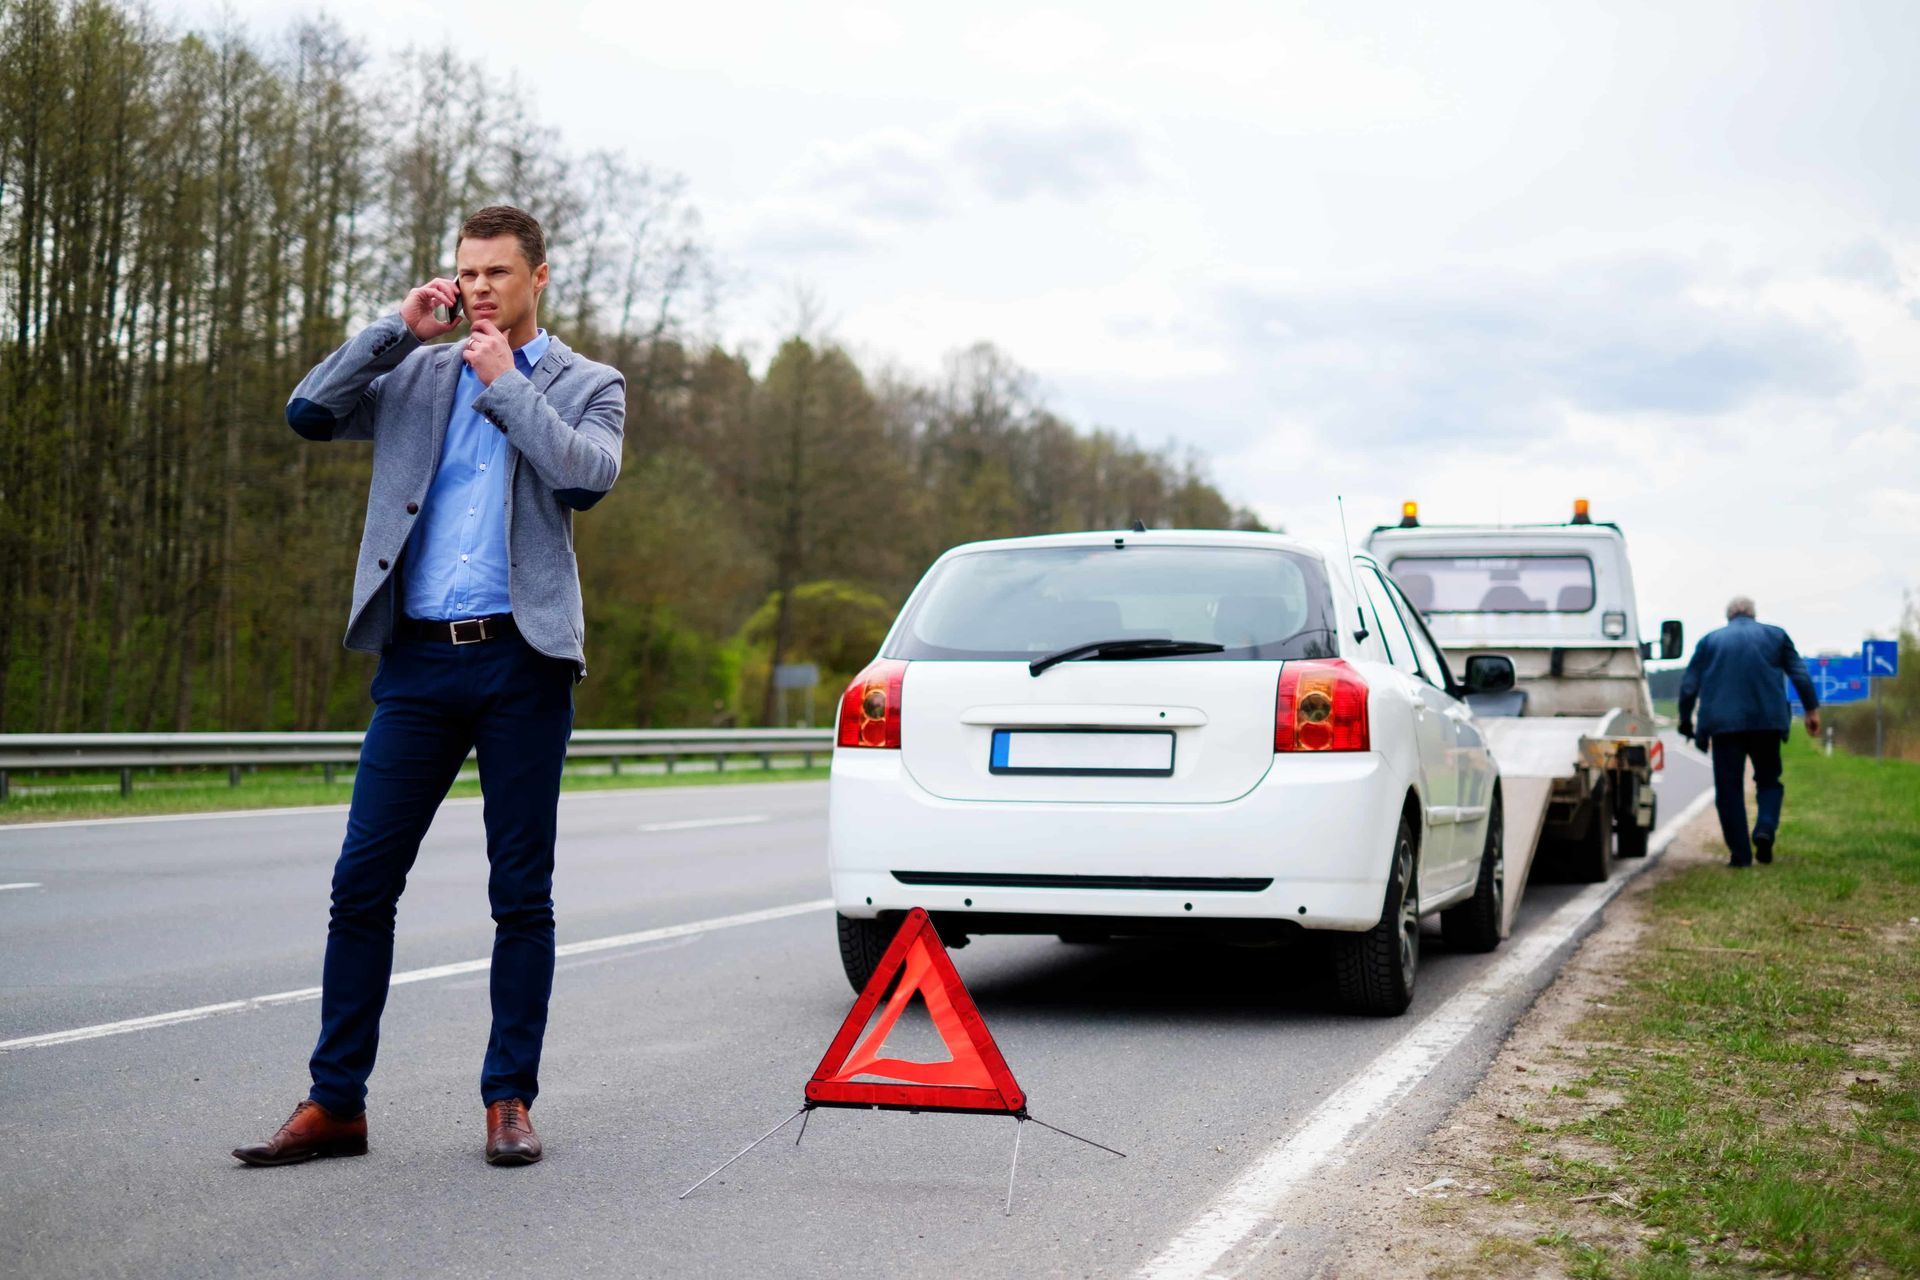 Man on the phone making a call after vehicle breakdown on the side of the road